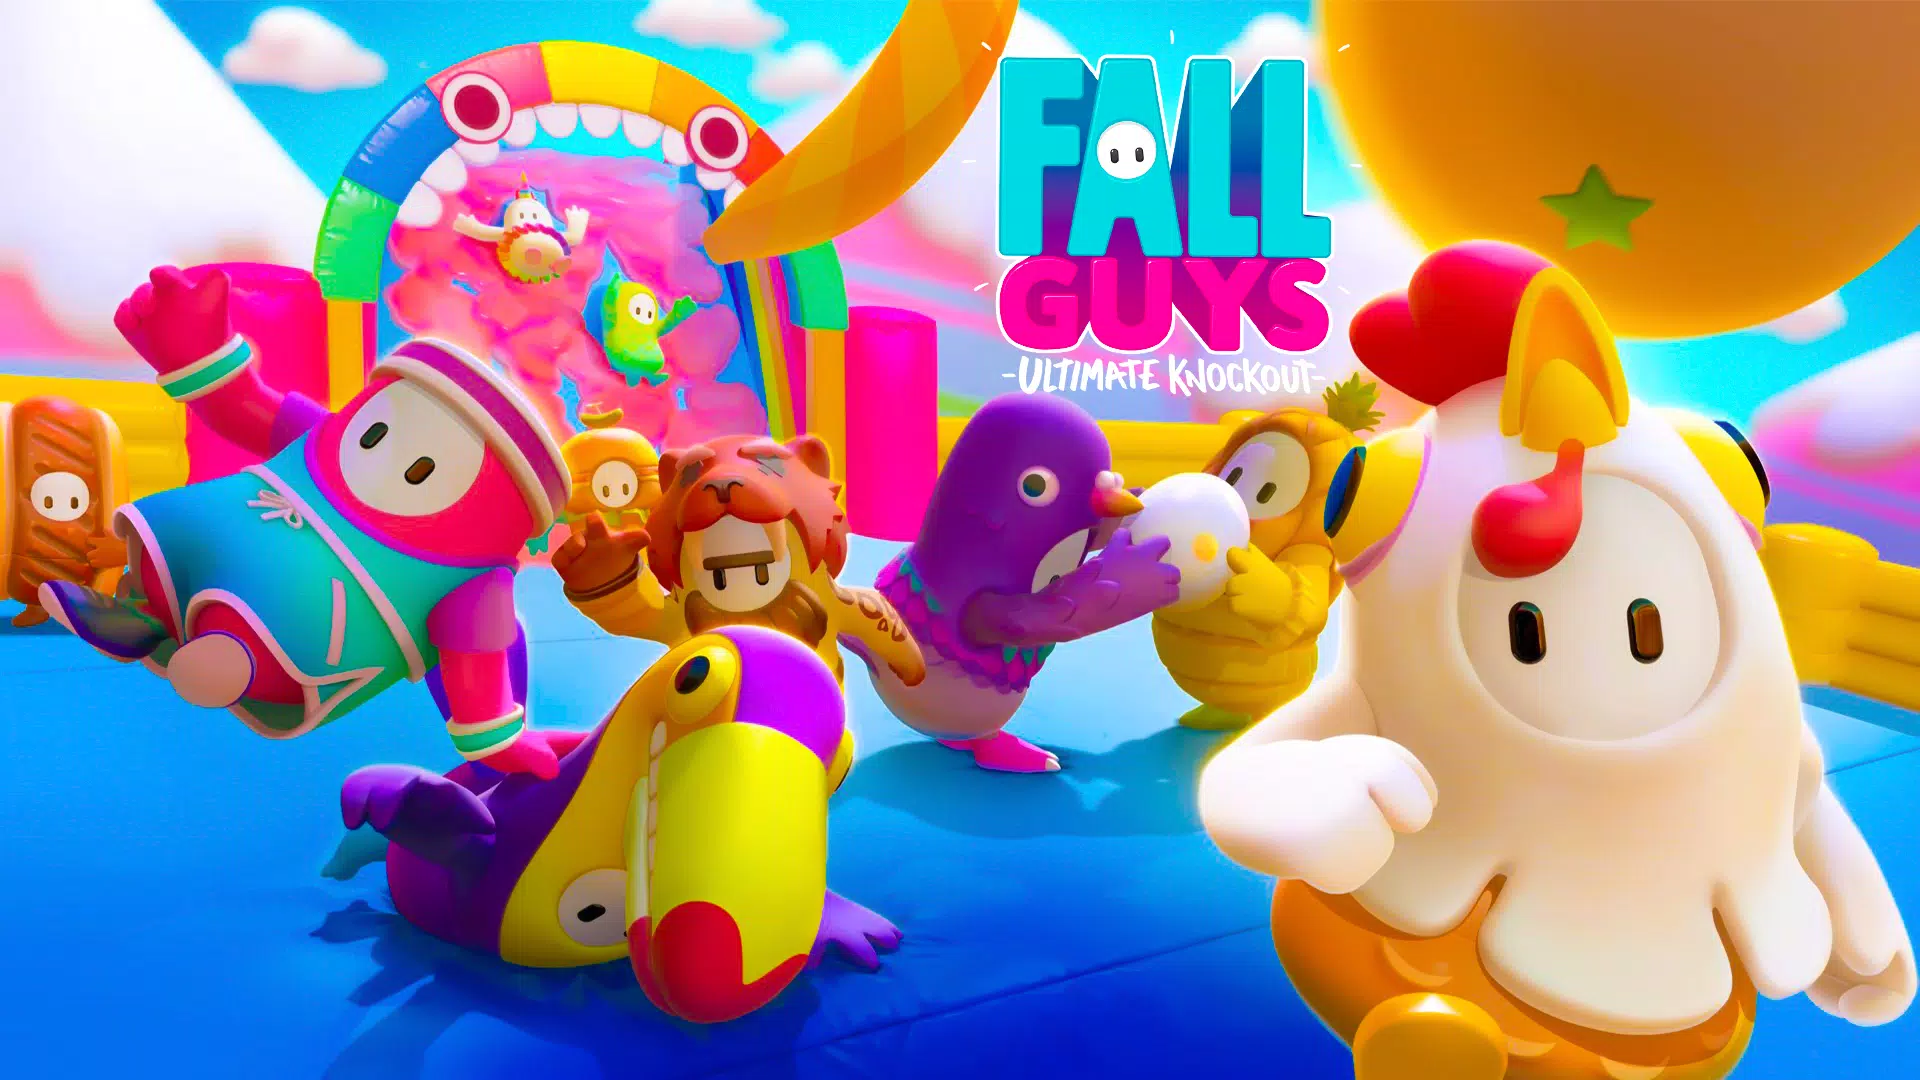 Fall Guys Ultimate Knockout Beta APK (Android App) - Free Download